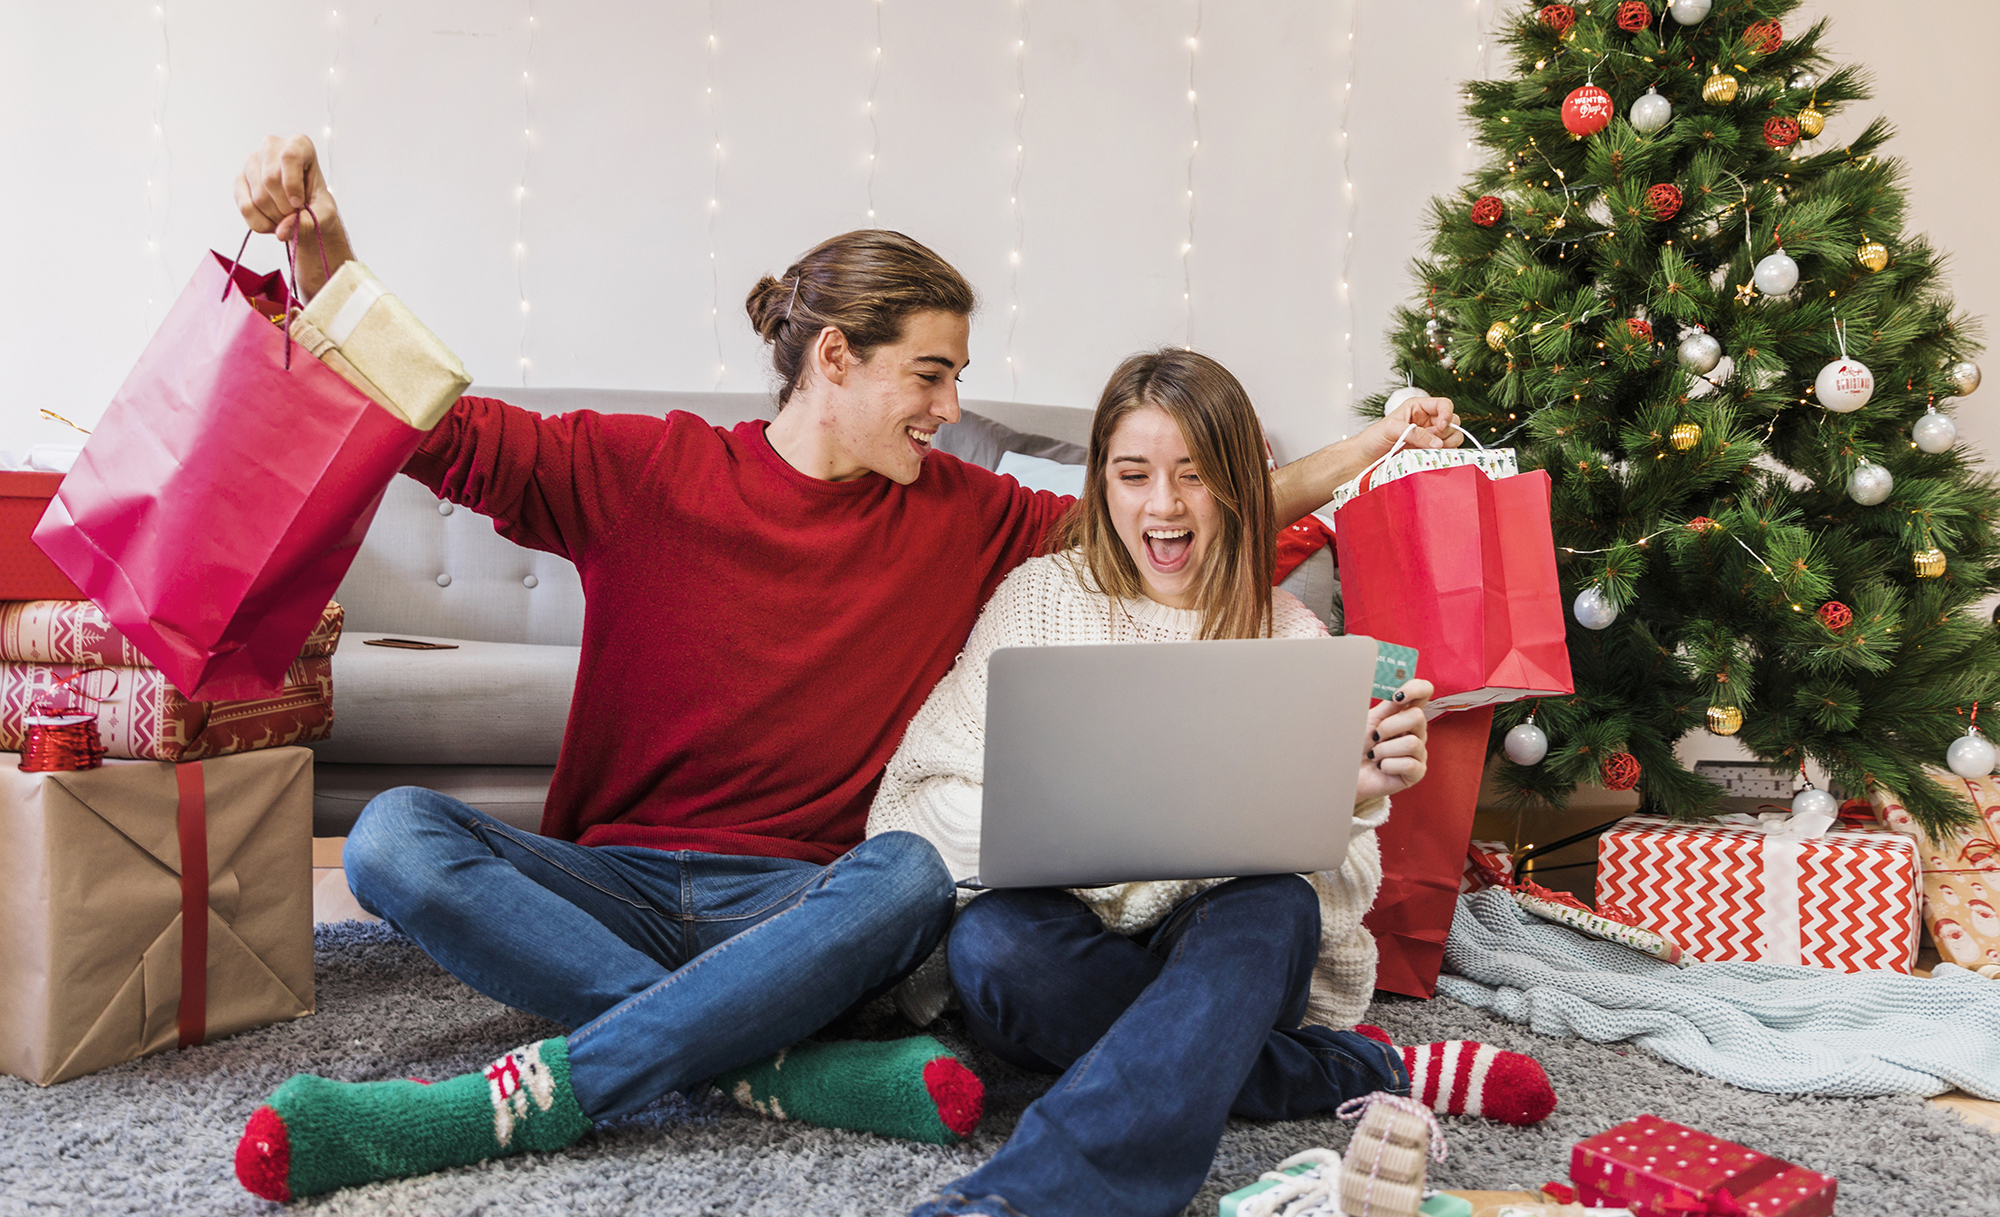 How to Make the most of Digital Christmas trends – Part 1